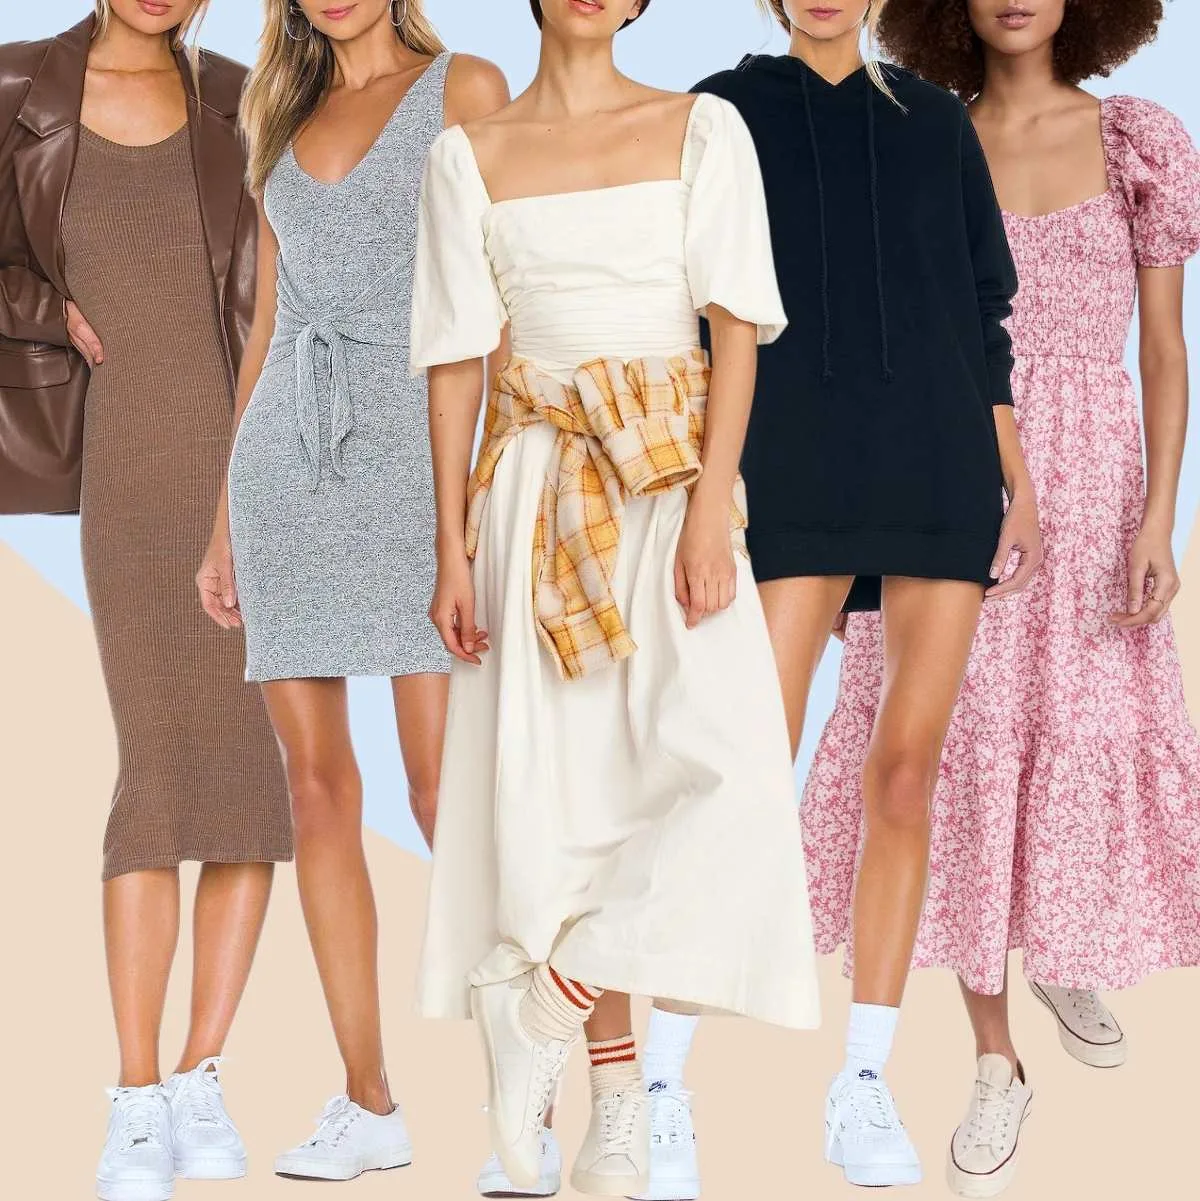 Collage of 5 women wearing white sneakers with dresses.